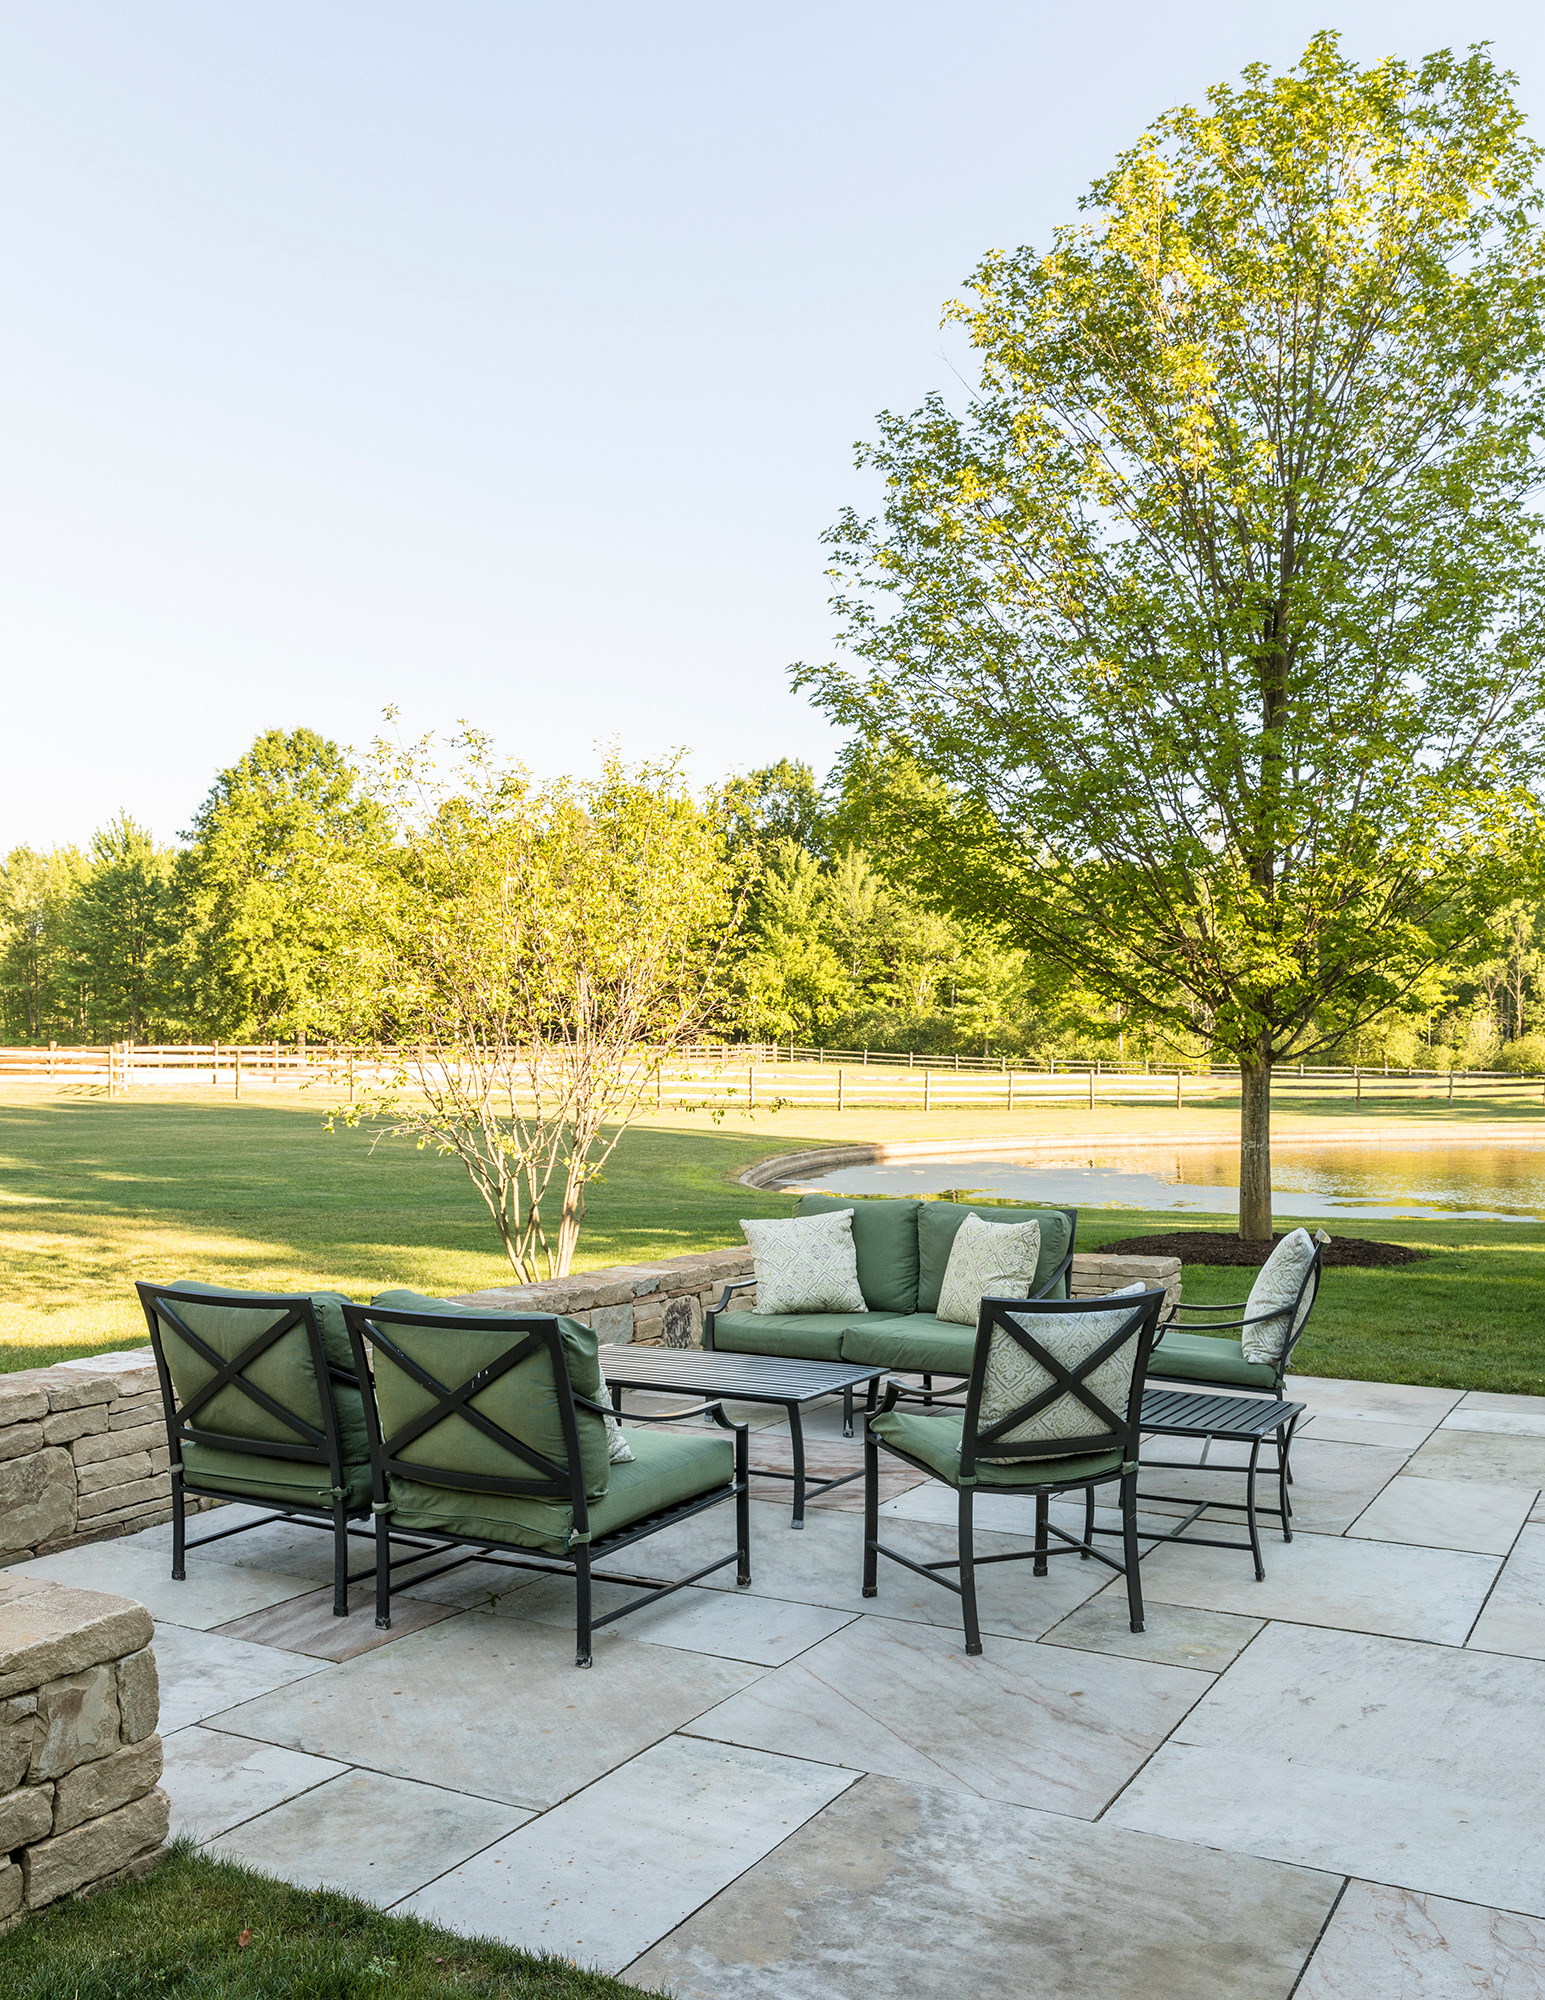 A side terrace is paved with large-scale local stone and enclosed by a low stone seat wall. A specimen Maple will provide shade while Serviceberries provide early spring flowers and a loose edge to the space.